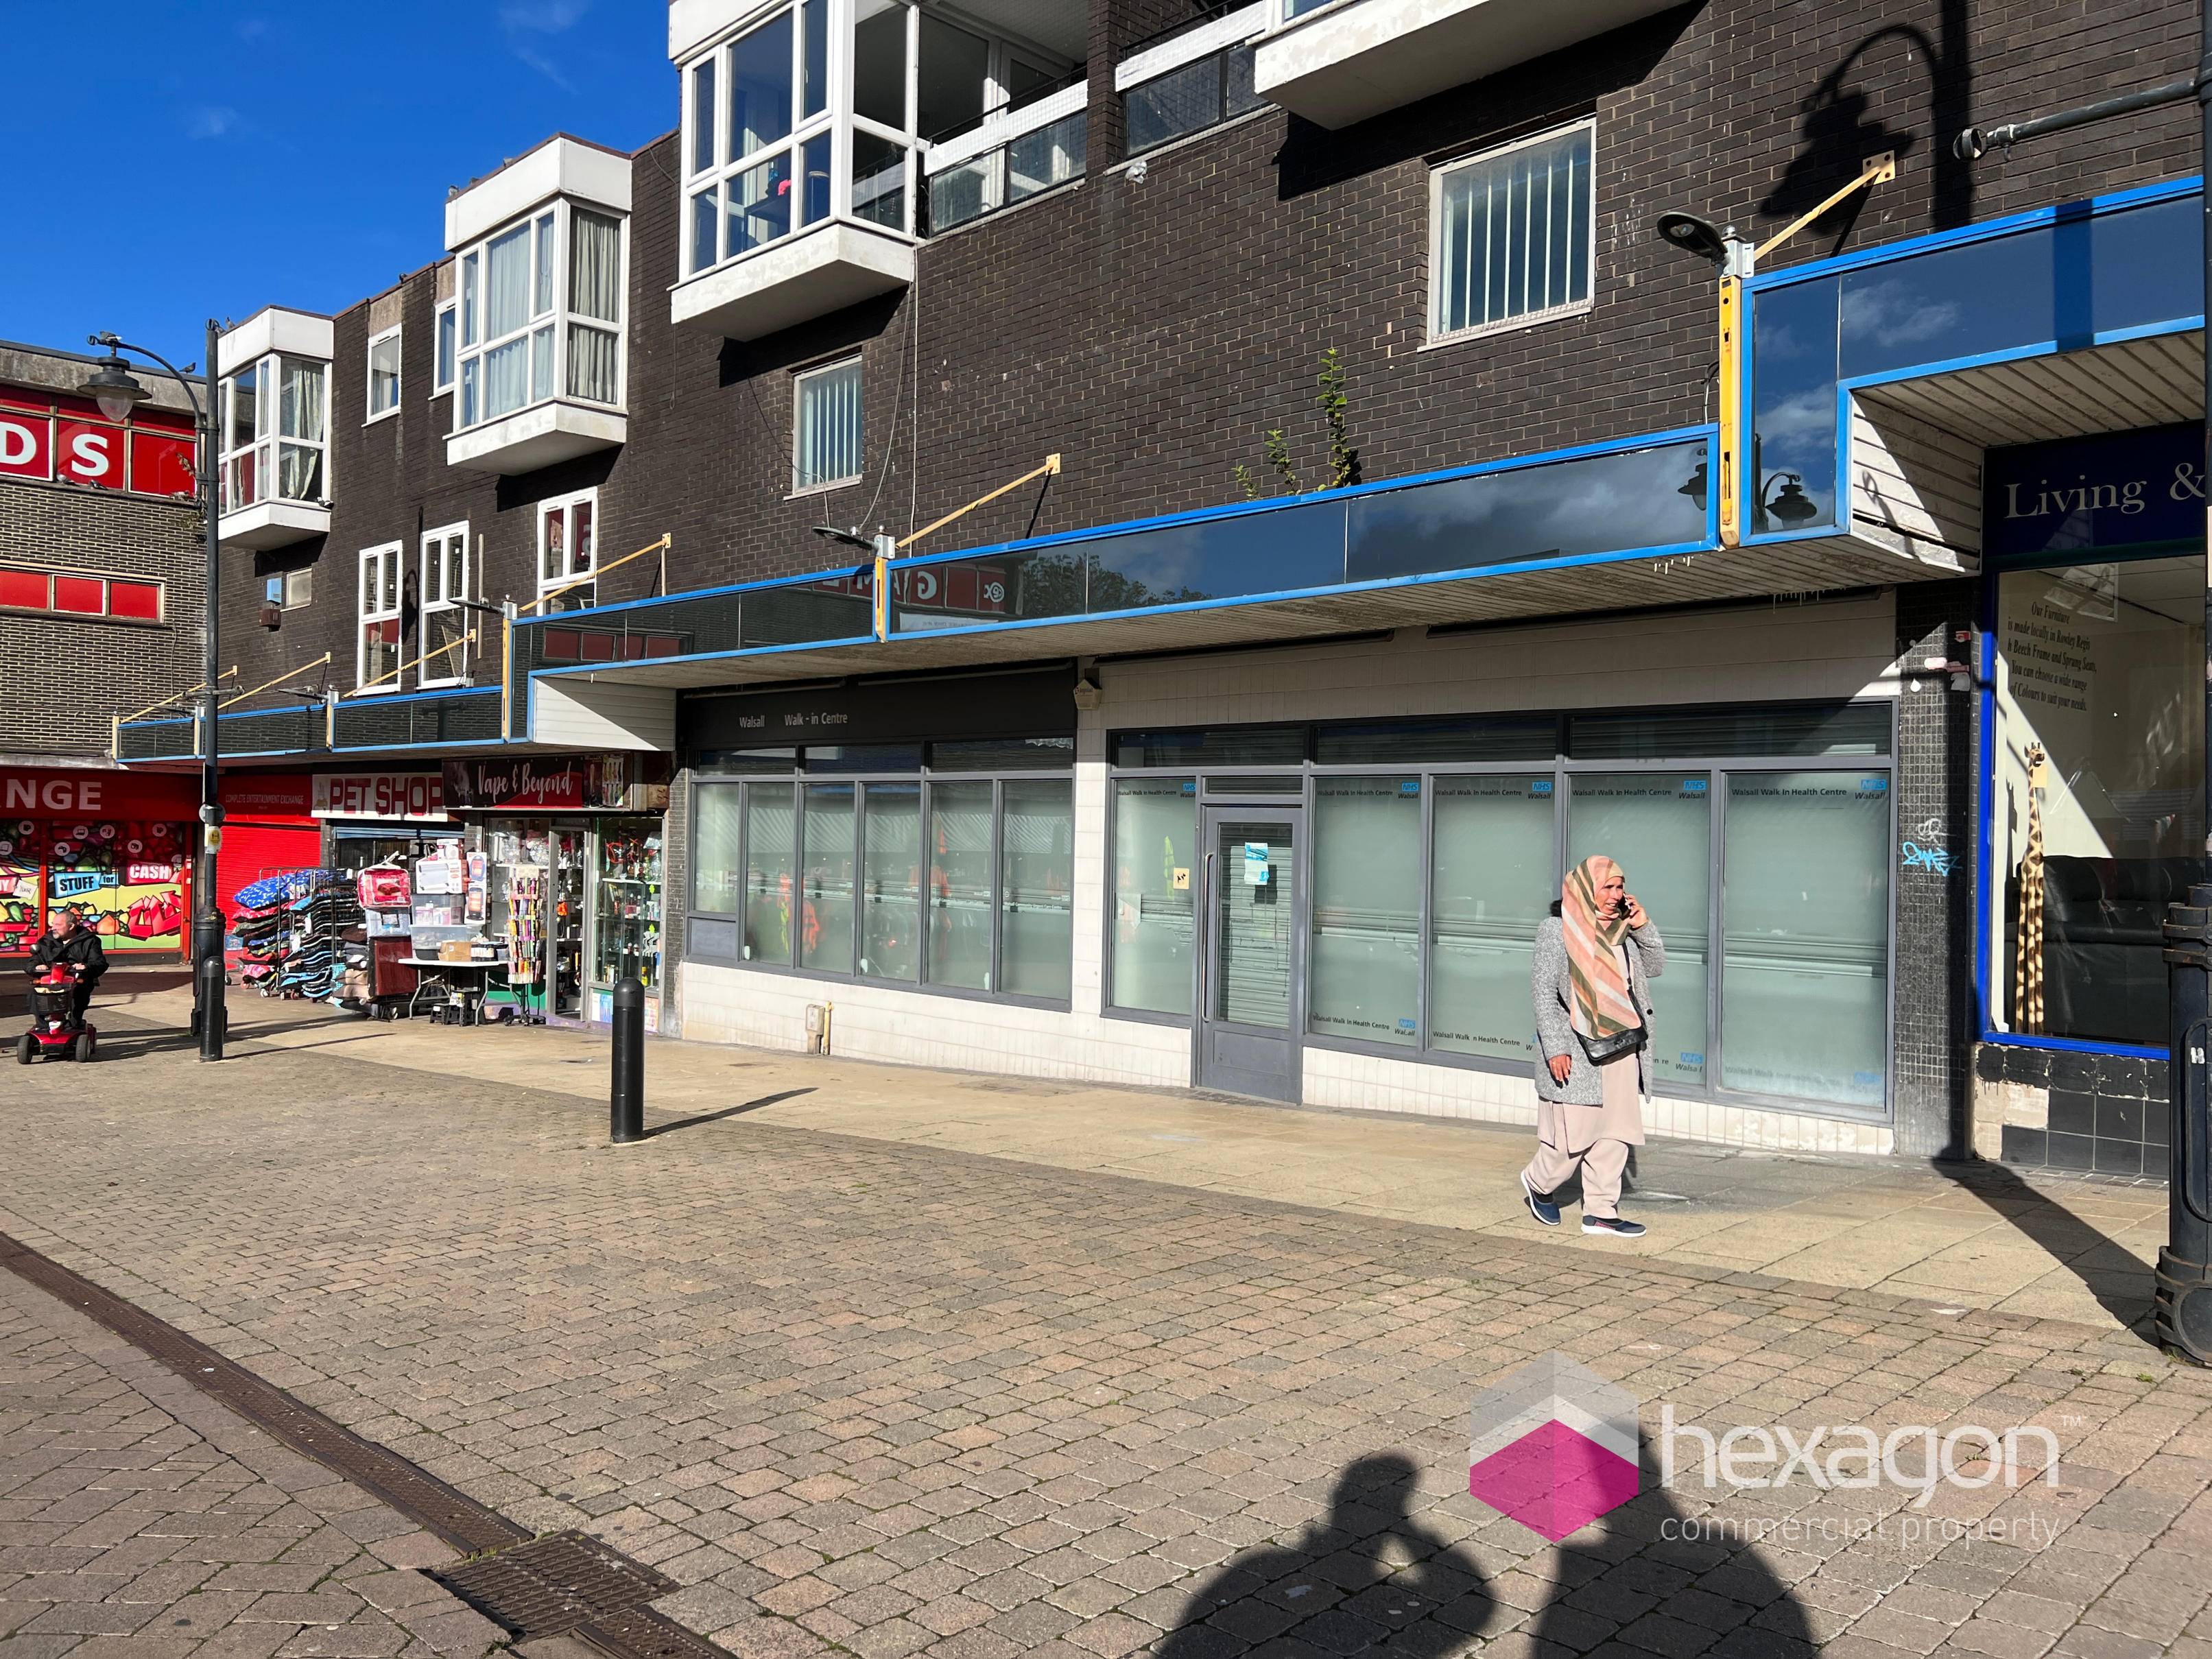 Retail Property (High Street) for rent in Walsall. From Hexagon Commercial Property